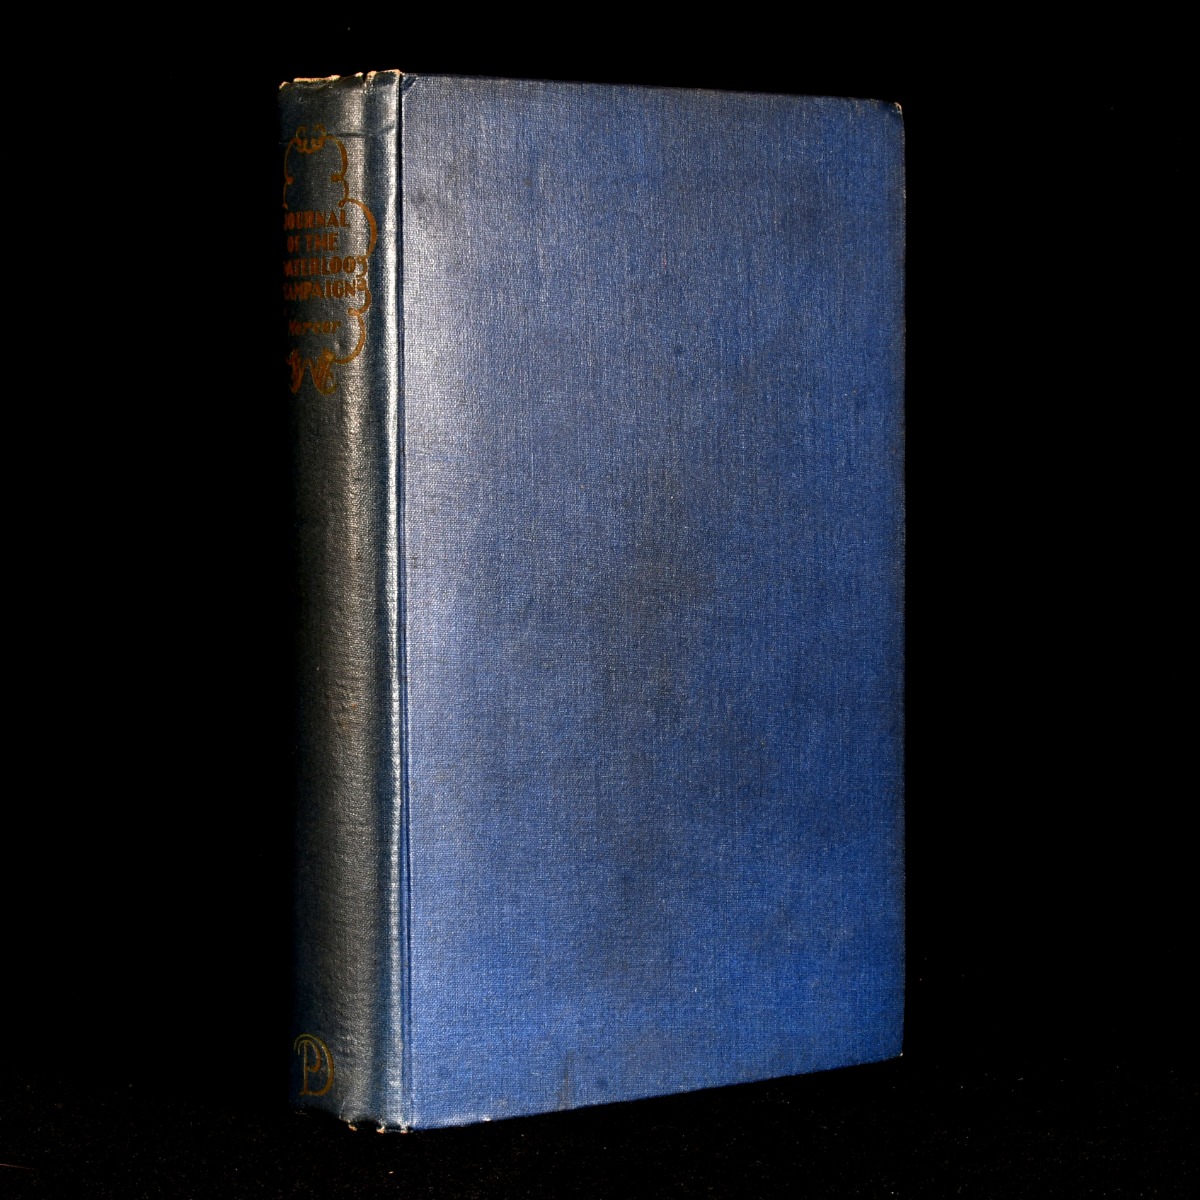 Journal of the Waterloo Campaign Kept Throughout the Campaign of 1815 - General Cavalie Mercer